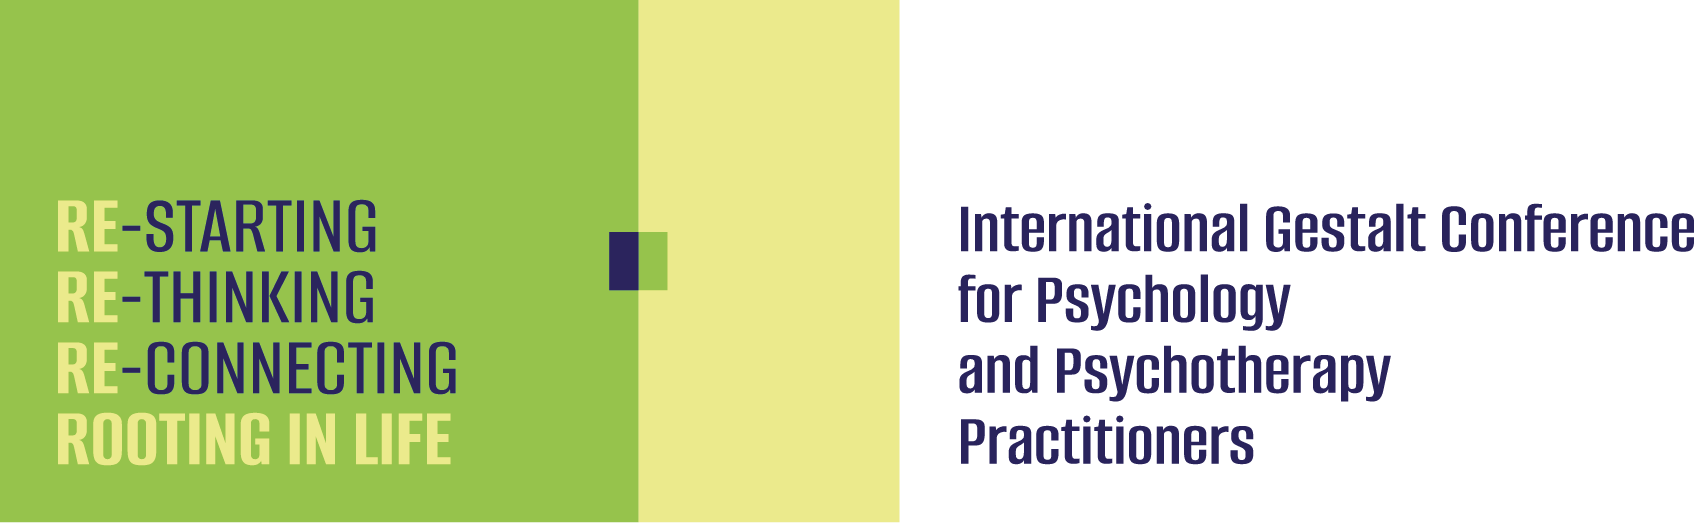 International Gestalt Conference for Psychology and Psychotherapy Practitioners Logo